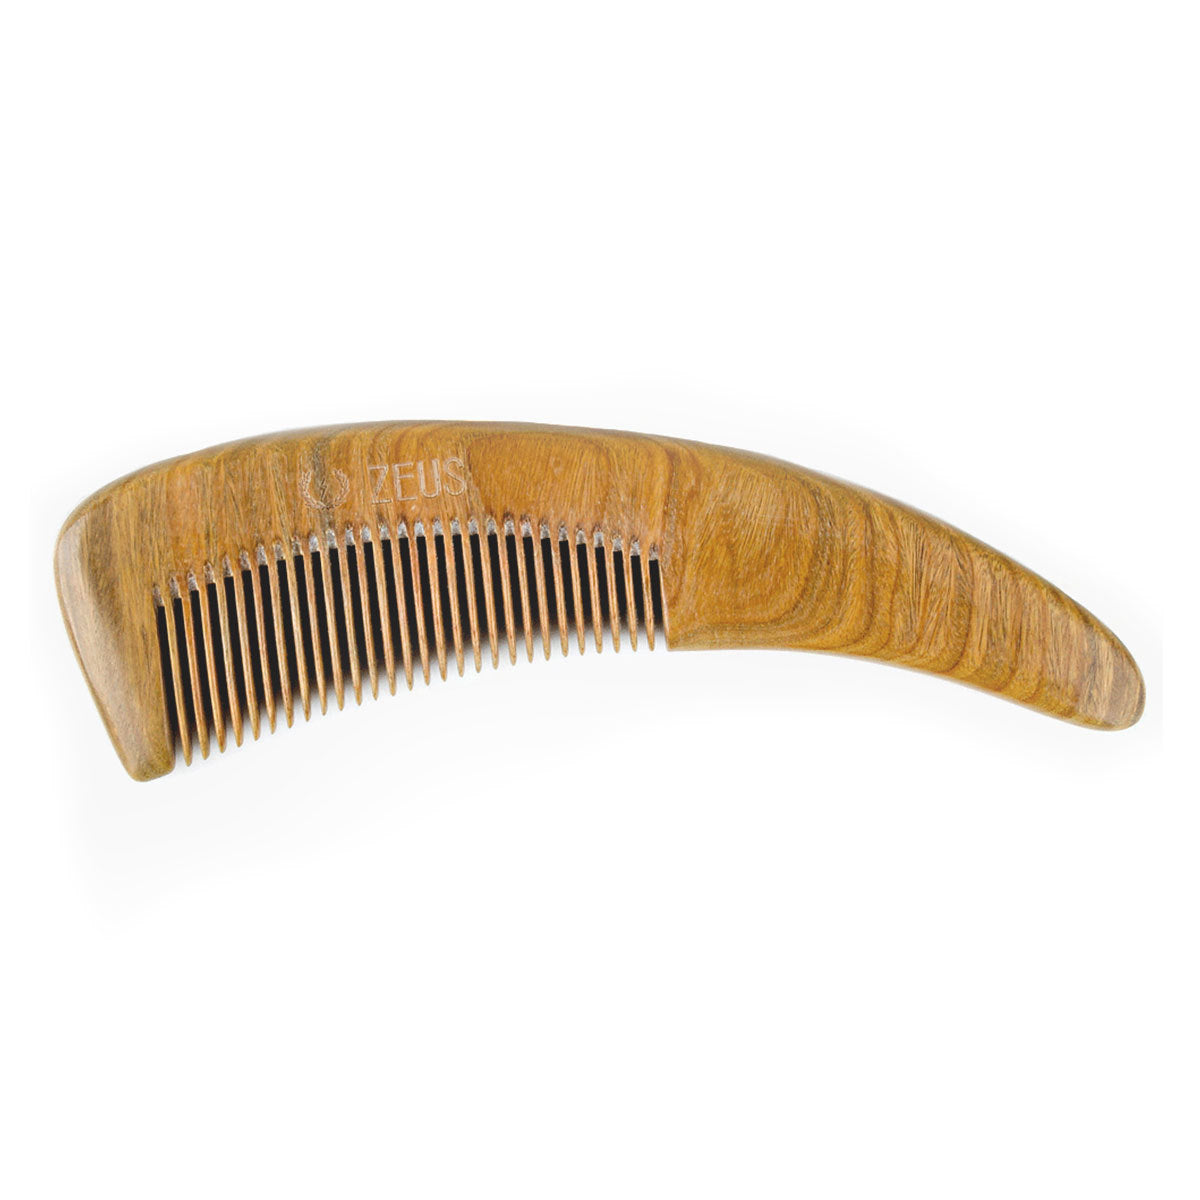 Primary image of Large Curved Sandalwood Beard Comb